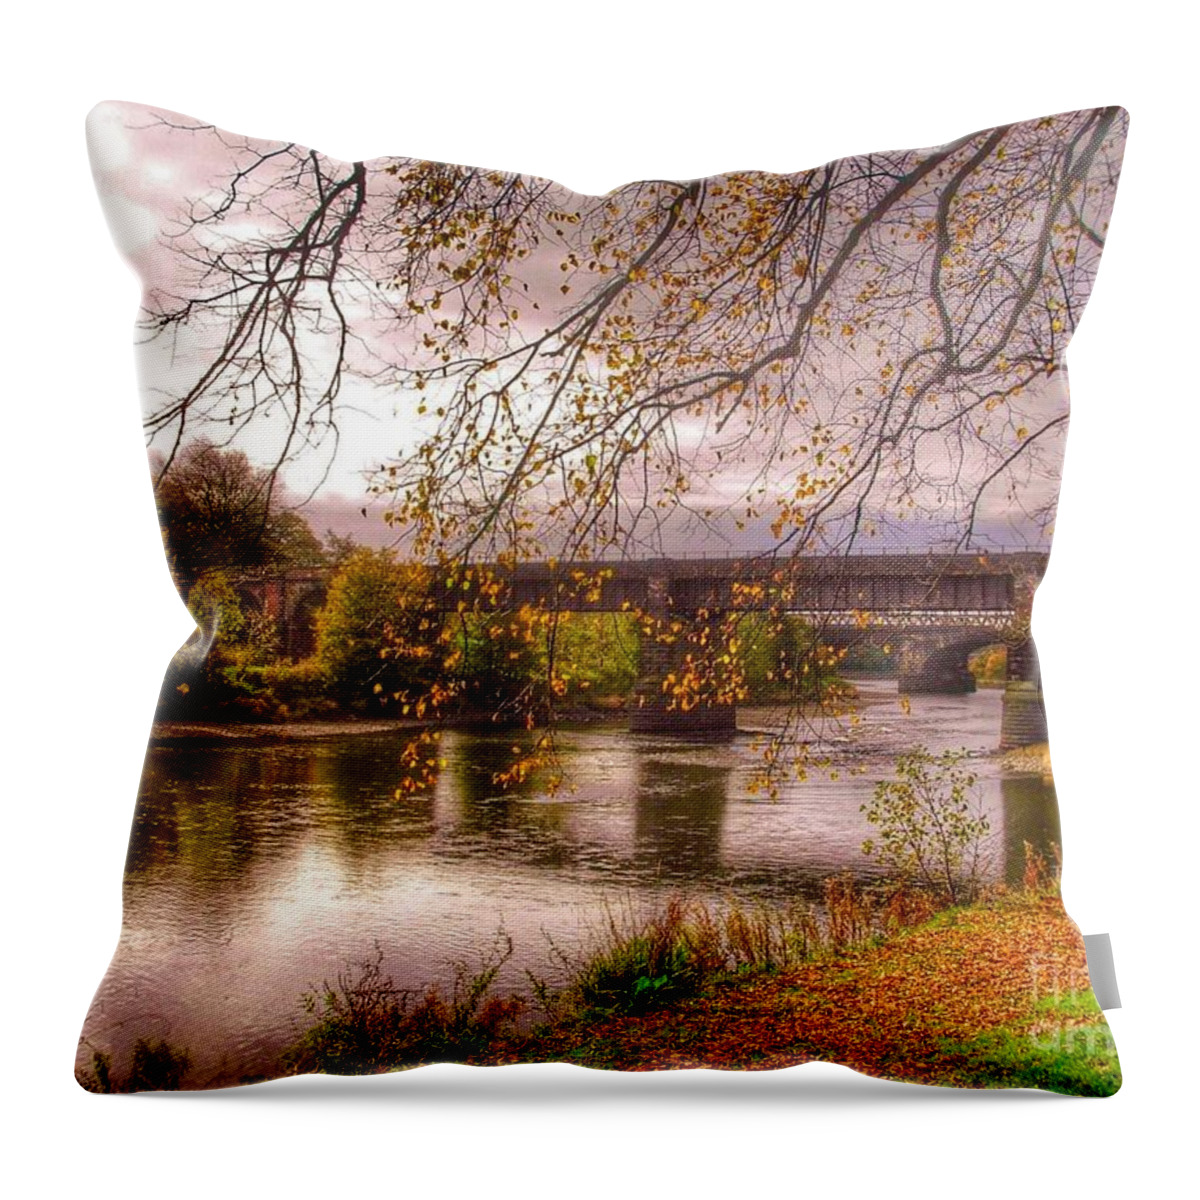 The Riverside Throw Pillow featuring the photograph The Riverside at Avenham Park by Joan-Violet Stretch